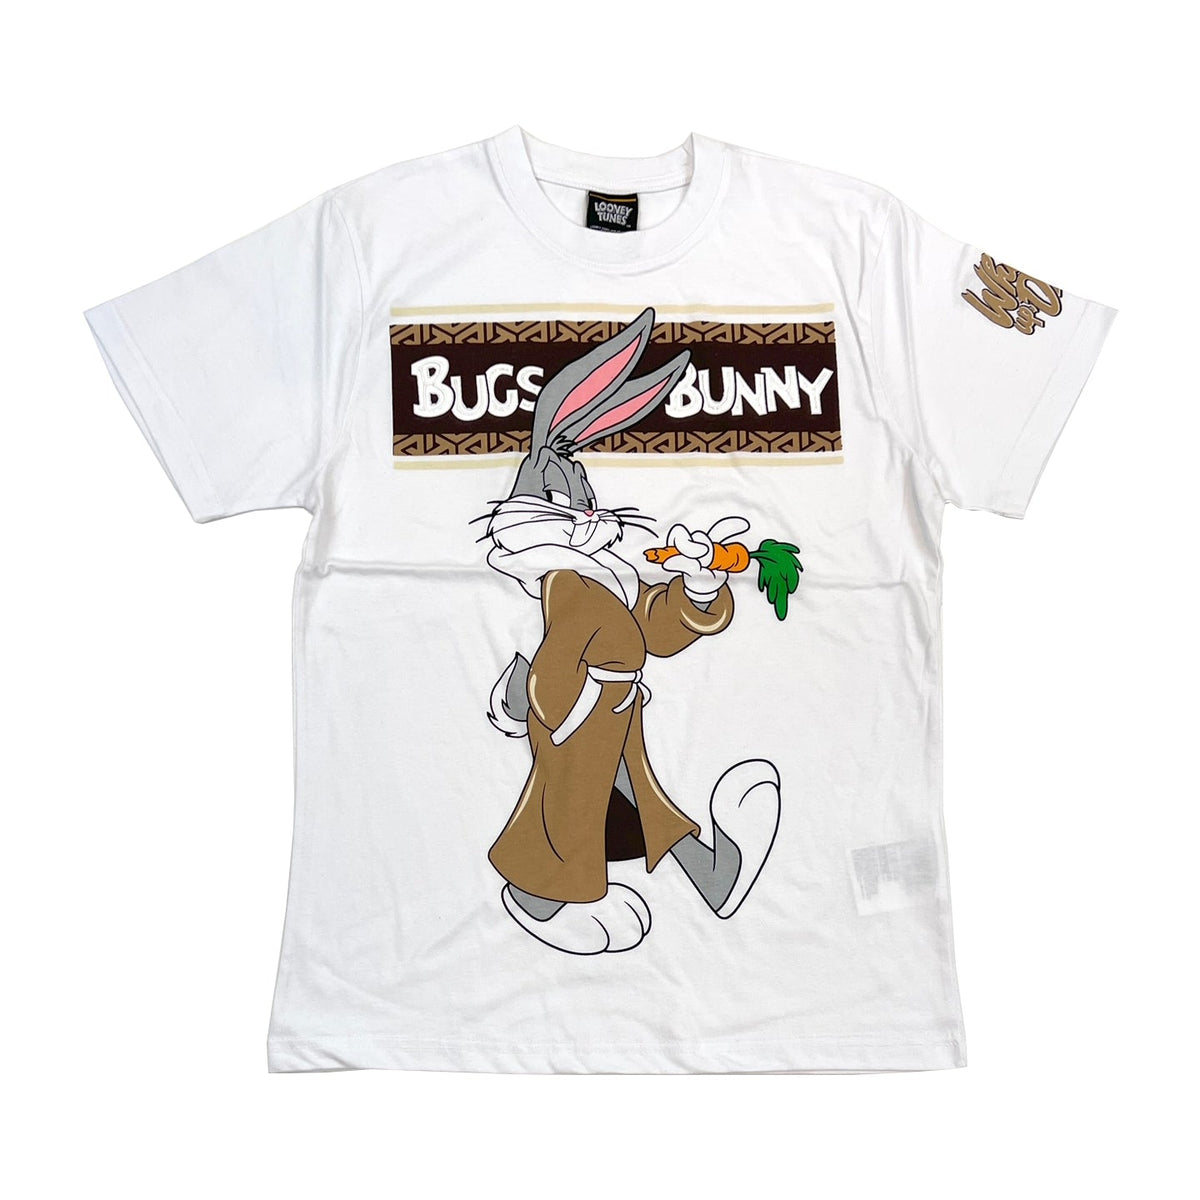 Tunes $30 for Bunny Tee Bugs (White) / 2 $16.99 Looney